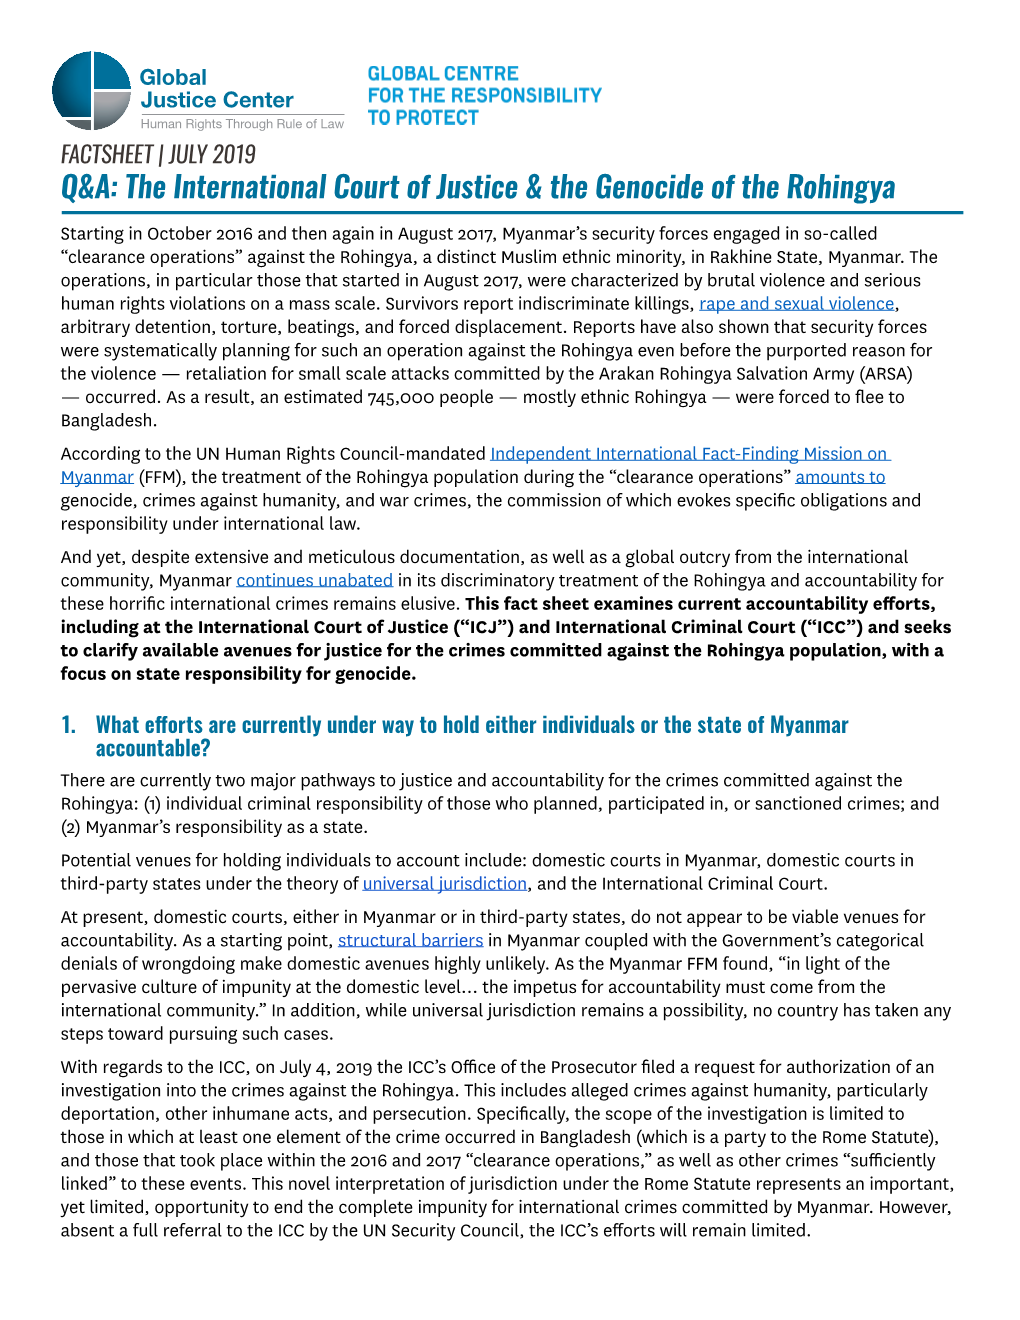 Q&A: the International Court of Justice & the Genocide of The